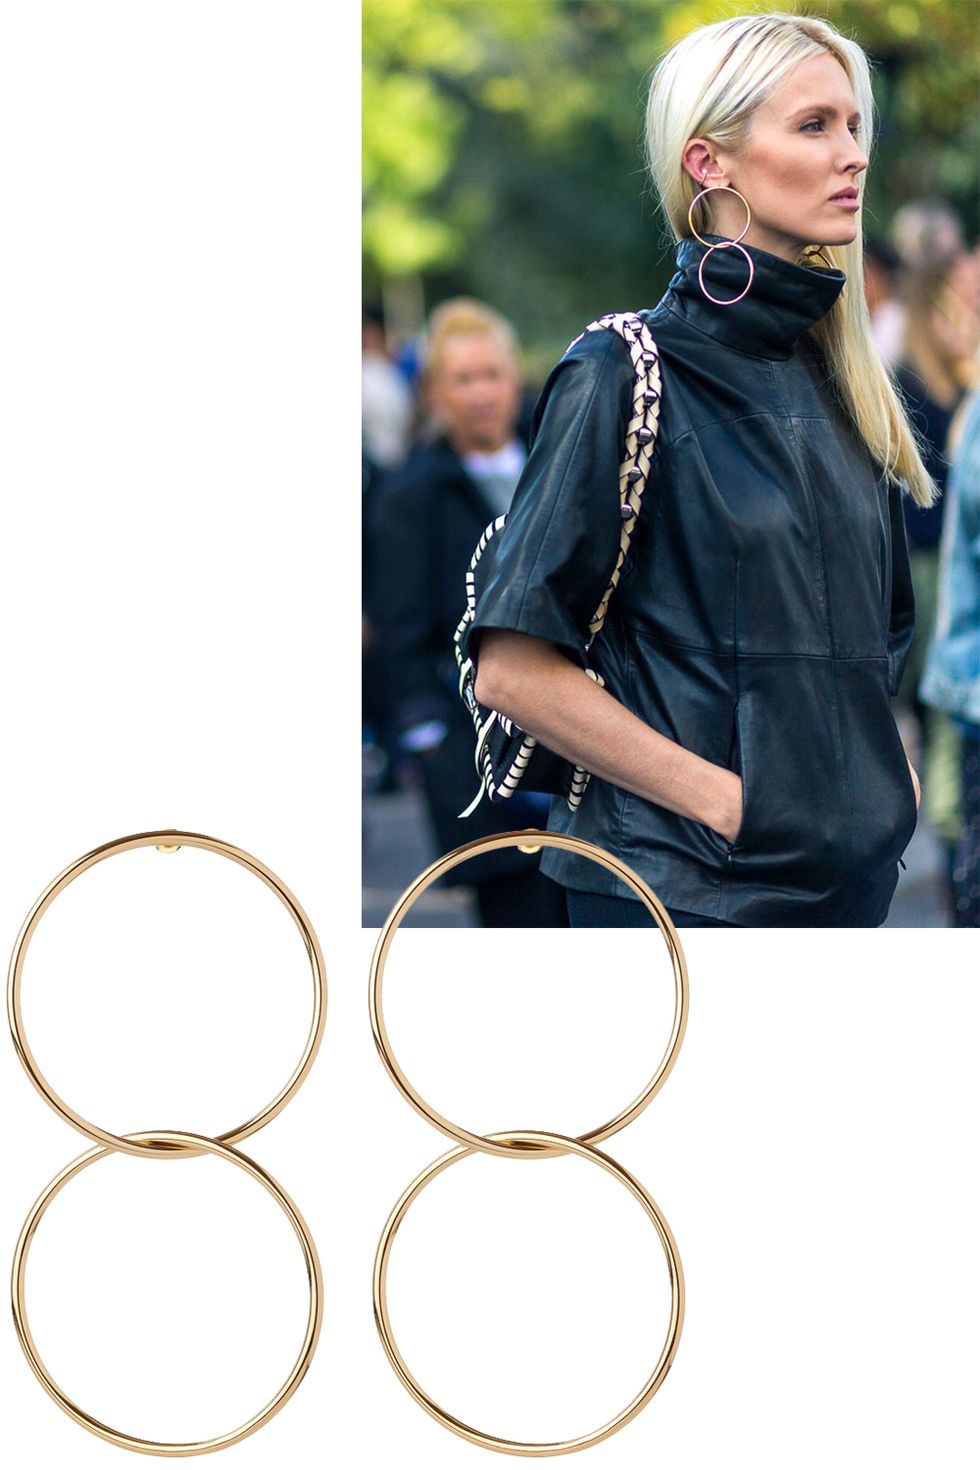 <p>It's no secret that statement earrings are on-trend, and&nbsp;Kate Davidson Hudson&nbsp;<span class="redactor-invisible-space">layered hers&nbsp;with a turtleneck.&nbsp;</span></p><p><em data-redactor-tag="em" data-verified="redactor">Jennifer Fisher earrings, $315 (pre-order), <strong data-redactor-tag="strong" data-verified="redactor"><a href="https://shop.harpersbazaar.com/j/jennifer-fisher/interlocking-smooth-circle-earrings-9699.html" target="_blank">shopBAZAAR.com</a></strong>.&nbsp;</em></p>